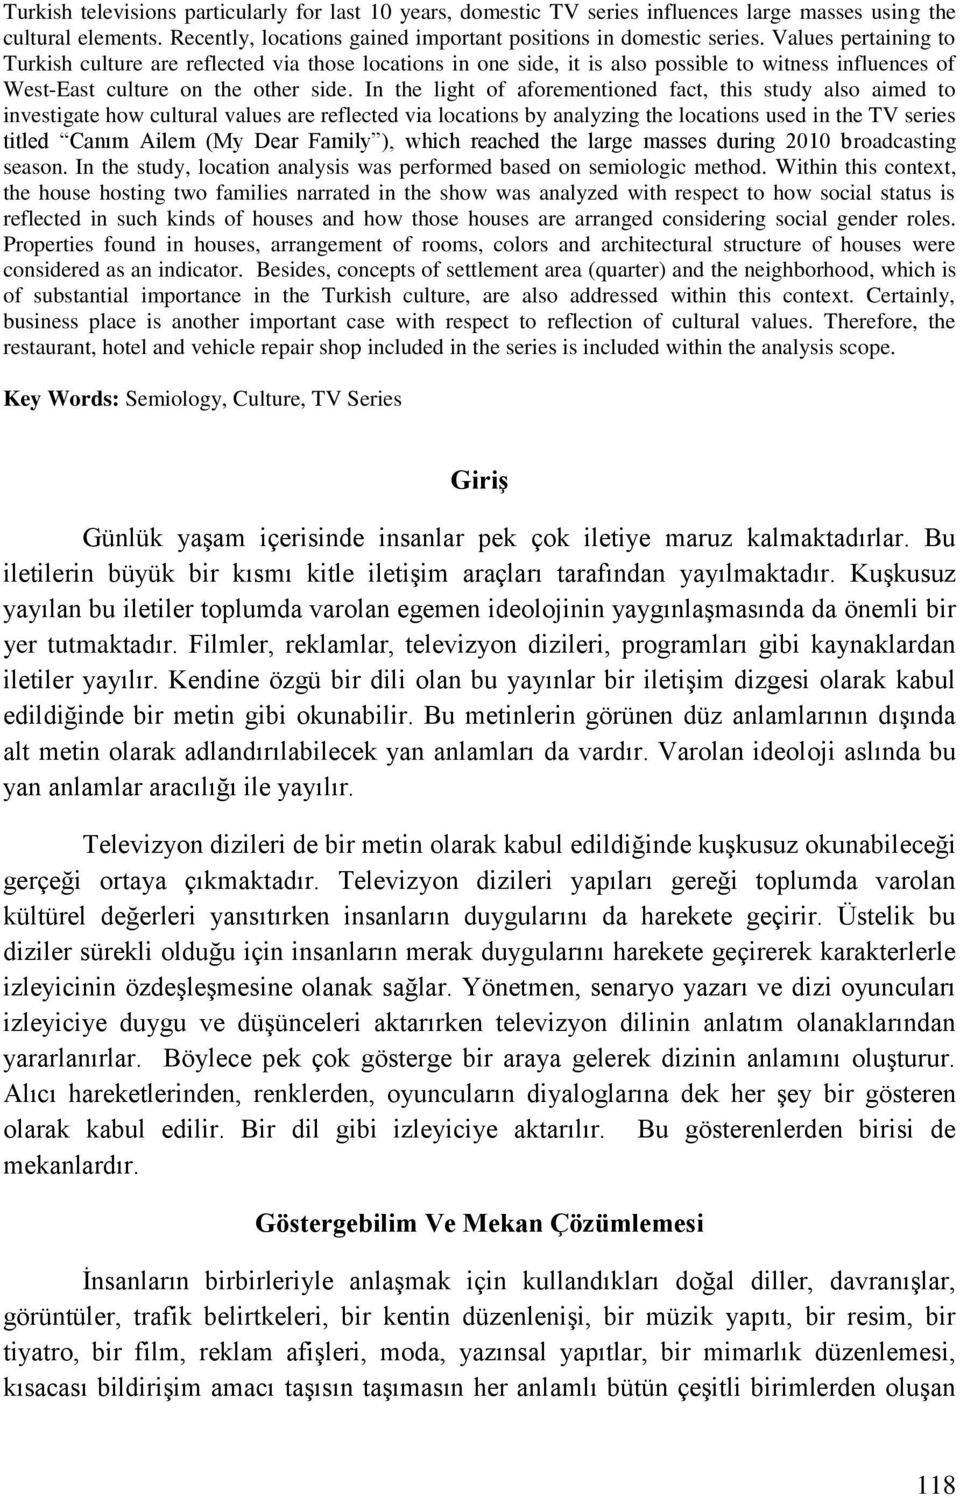 In the light of aforementioned fact, this study also aimed to investigate how cultural values are reflected via locations by analyzing the locations used in the TV series titled Canım Ailem (My Dear